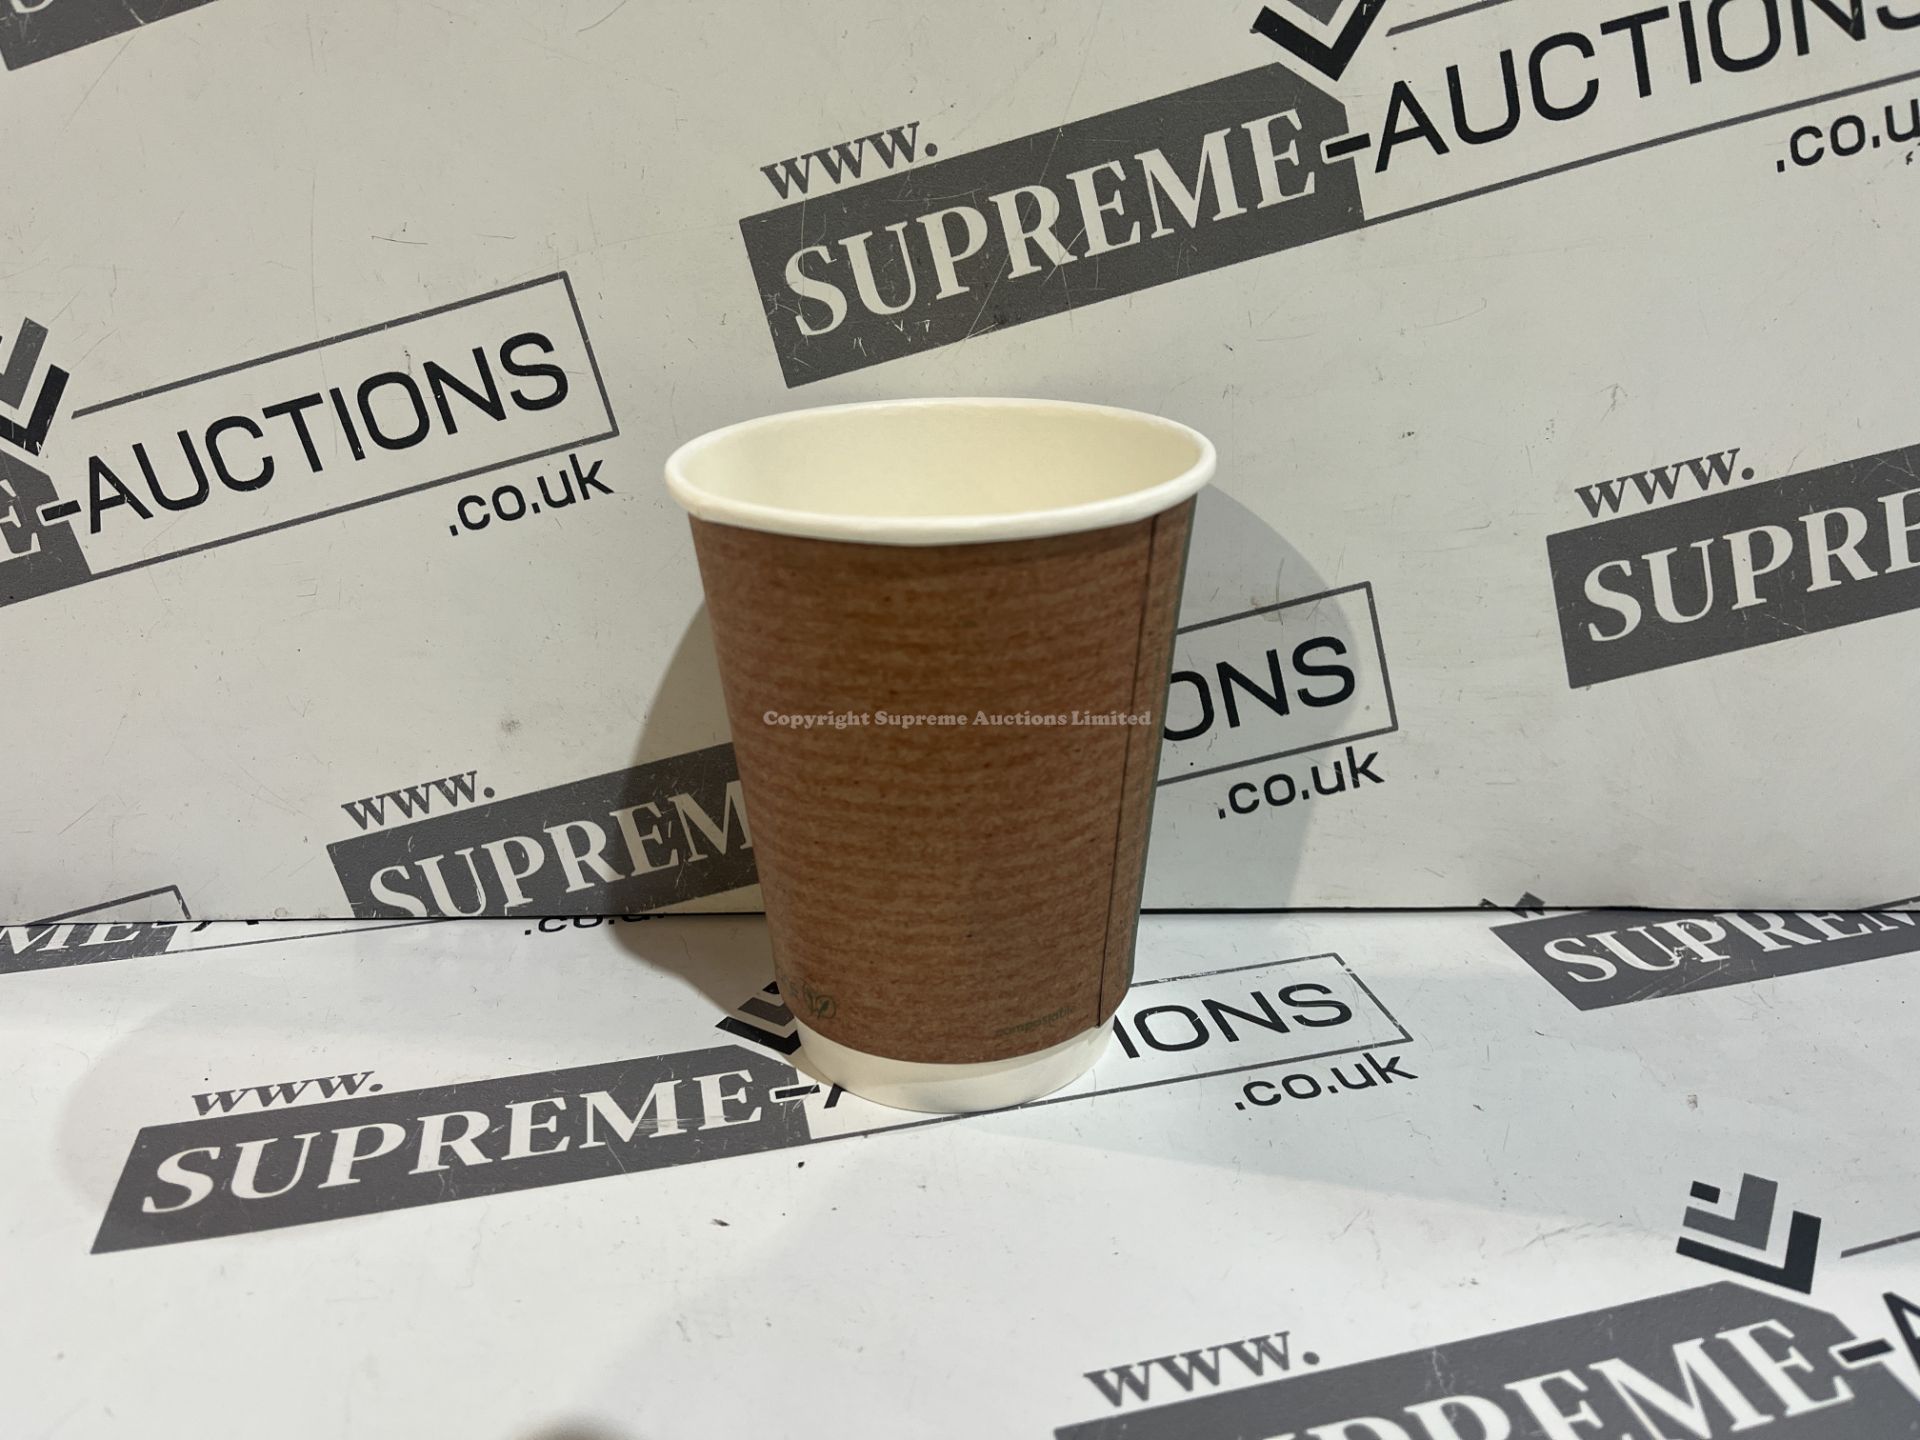 2 X BRAND NEW PACKS OF 500 12OZ DOUBLE WALL BROWN CUPS R15-5